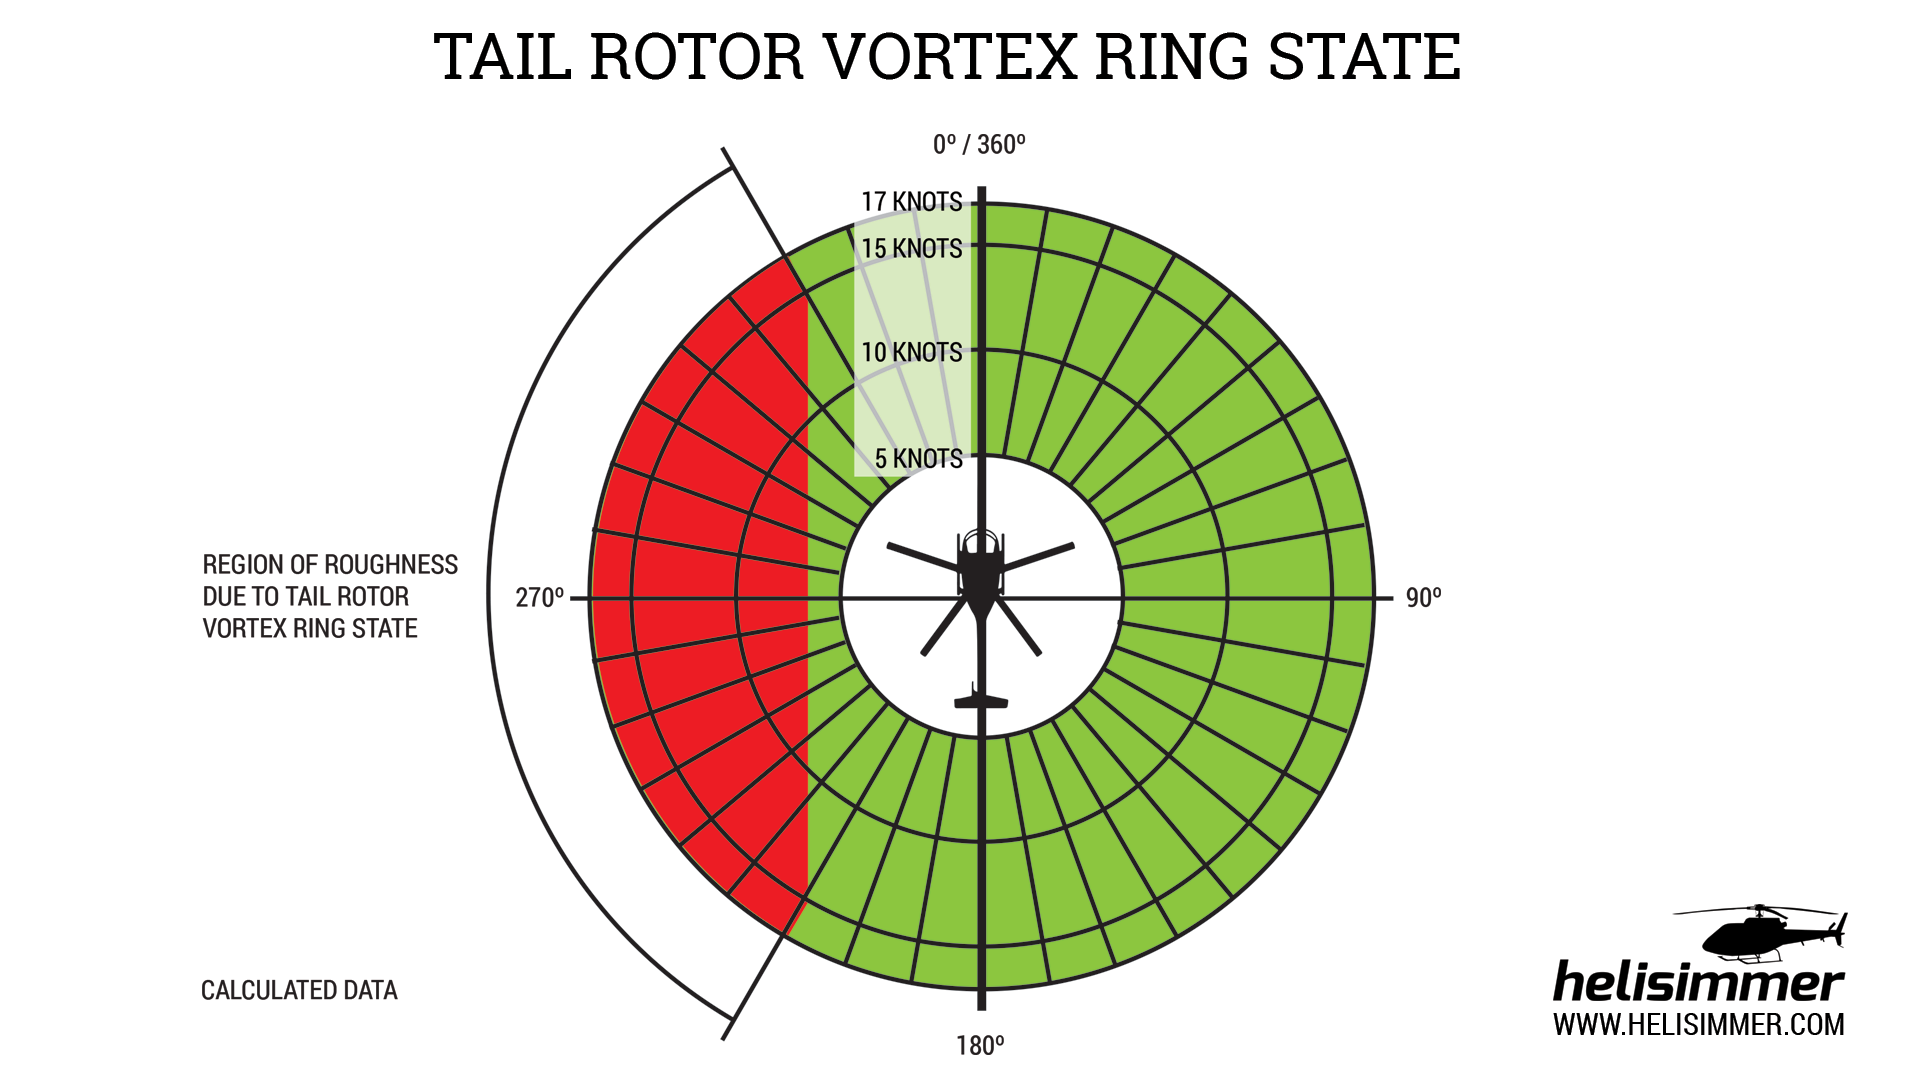 LTE - tail rotor vortex ring state (VRS)